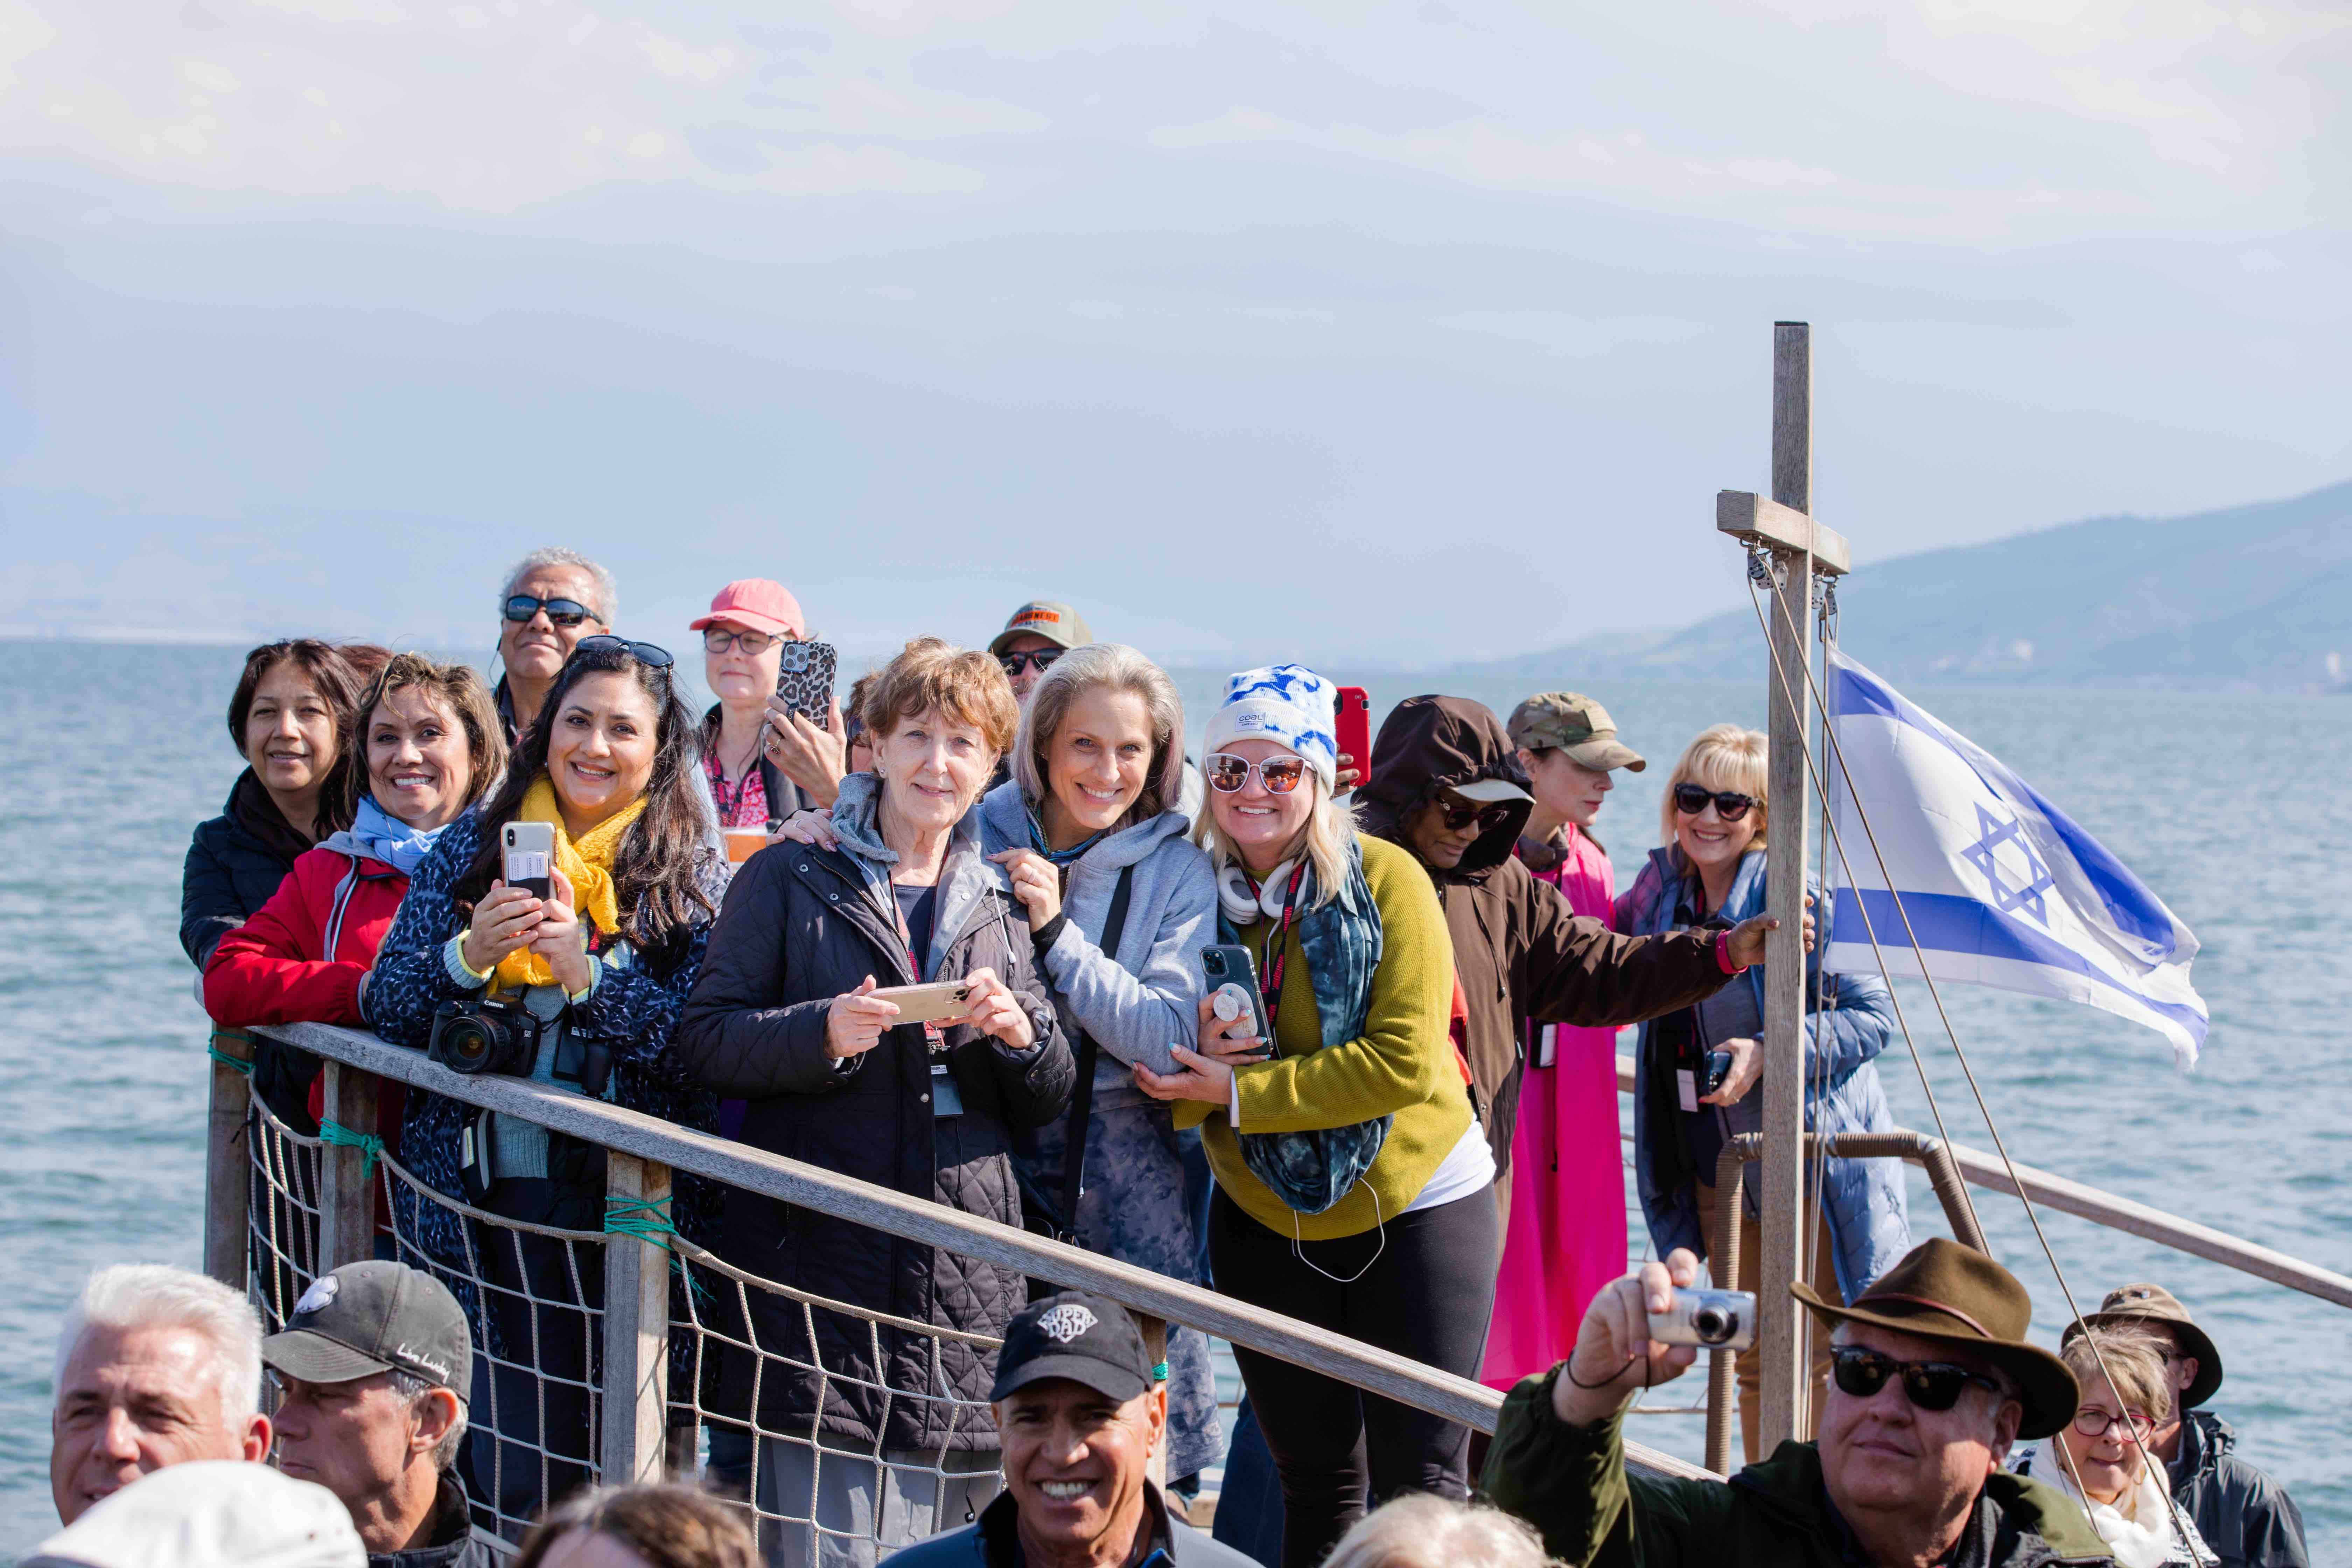 Inspiration travelers on a boat ride on the Sea of Galilee